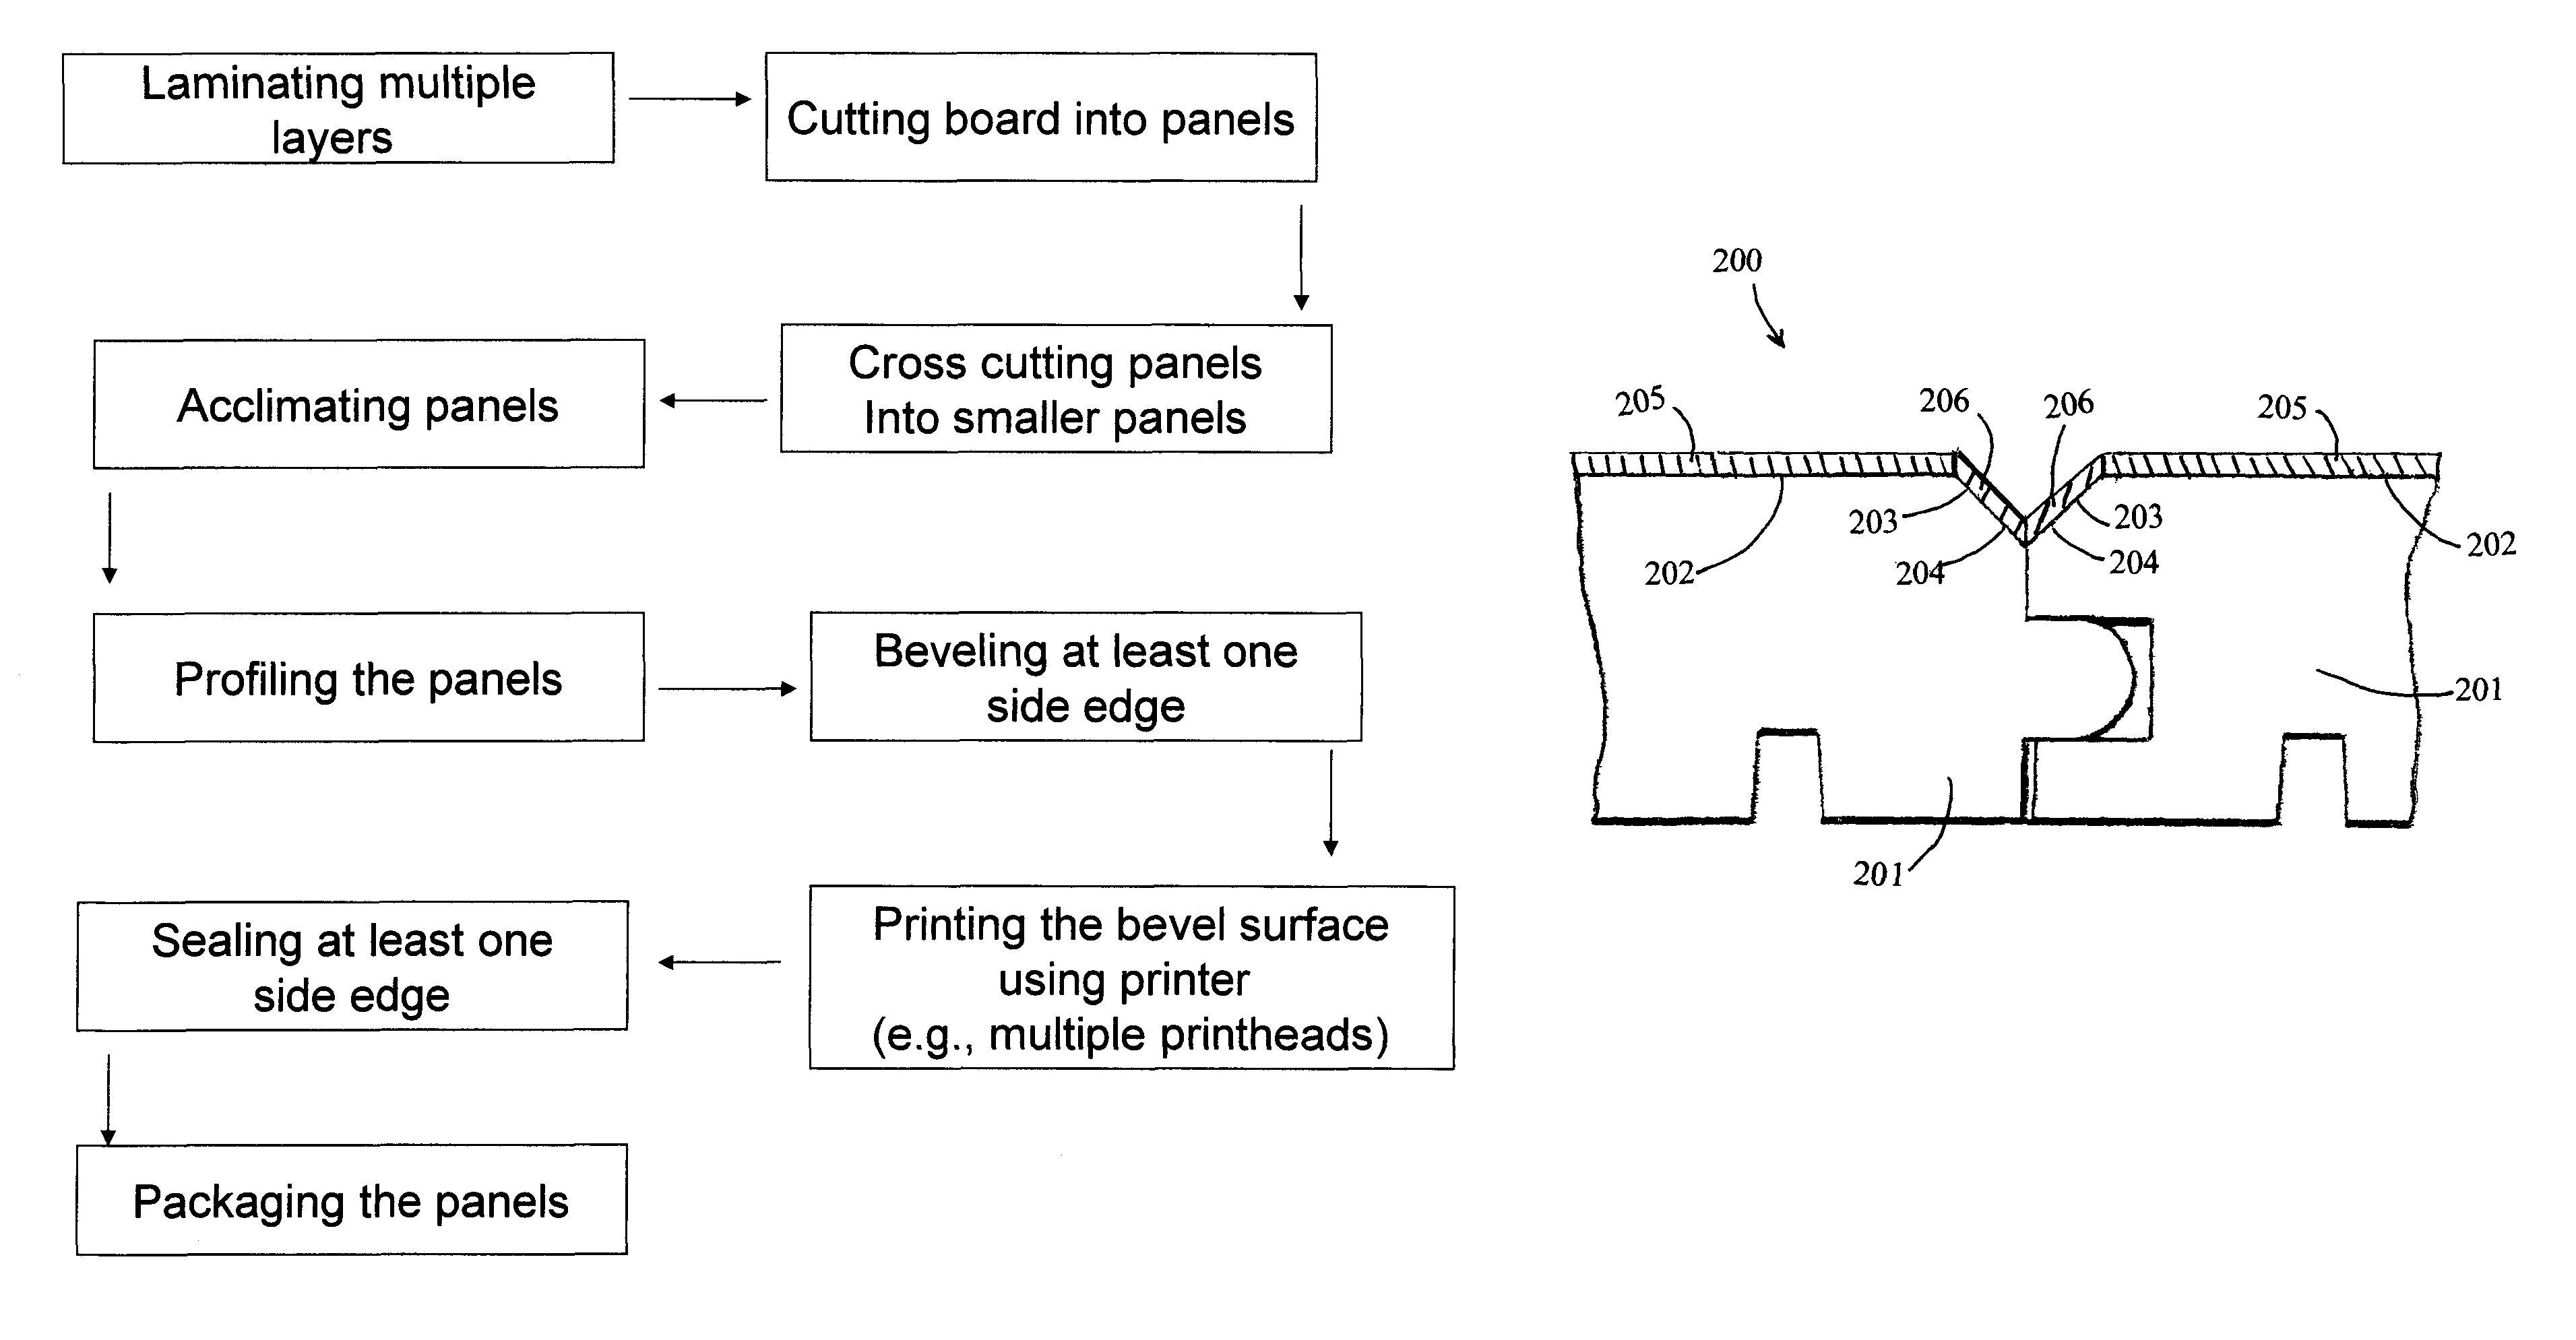 Methods and systems for decorating bevel and other surfaces of laminated floorings